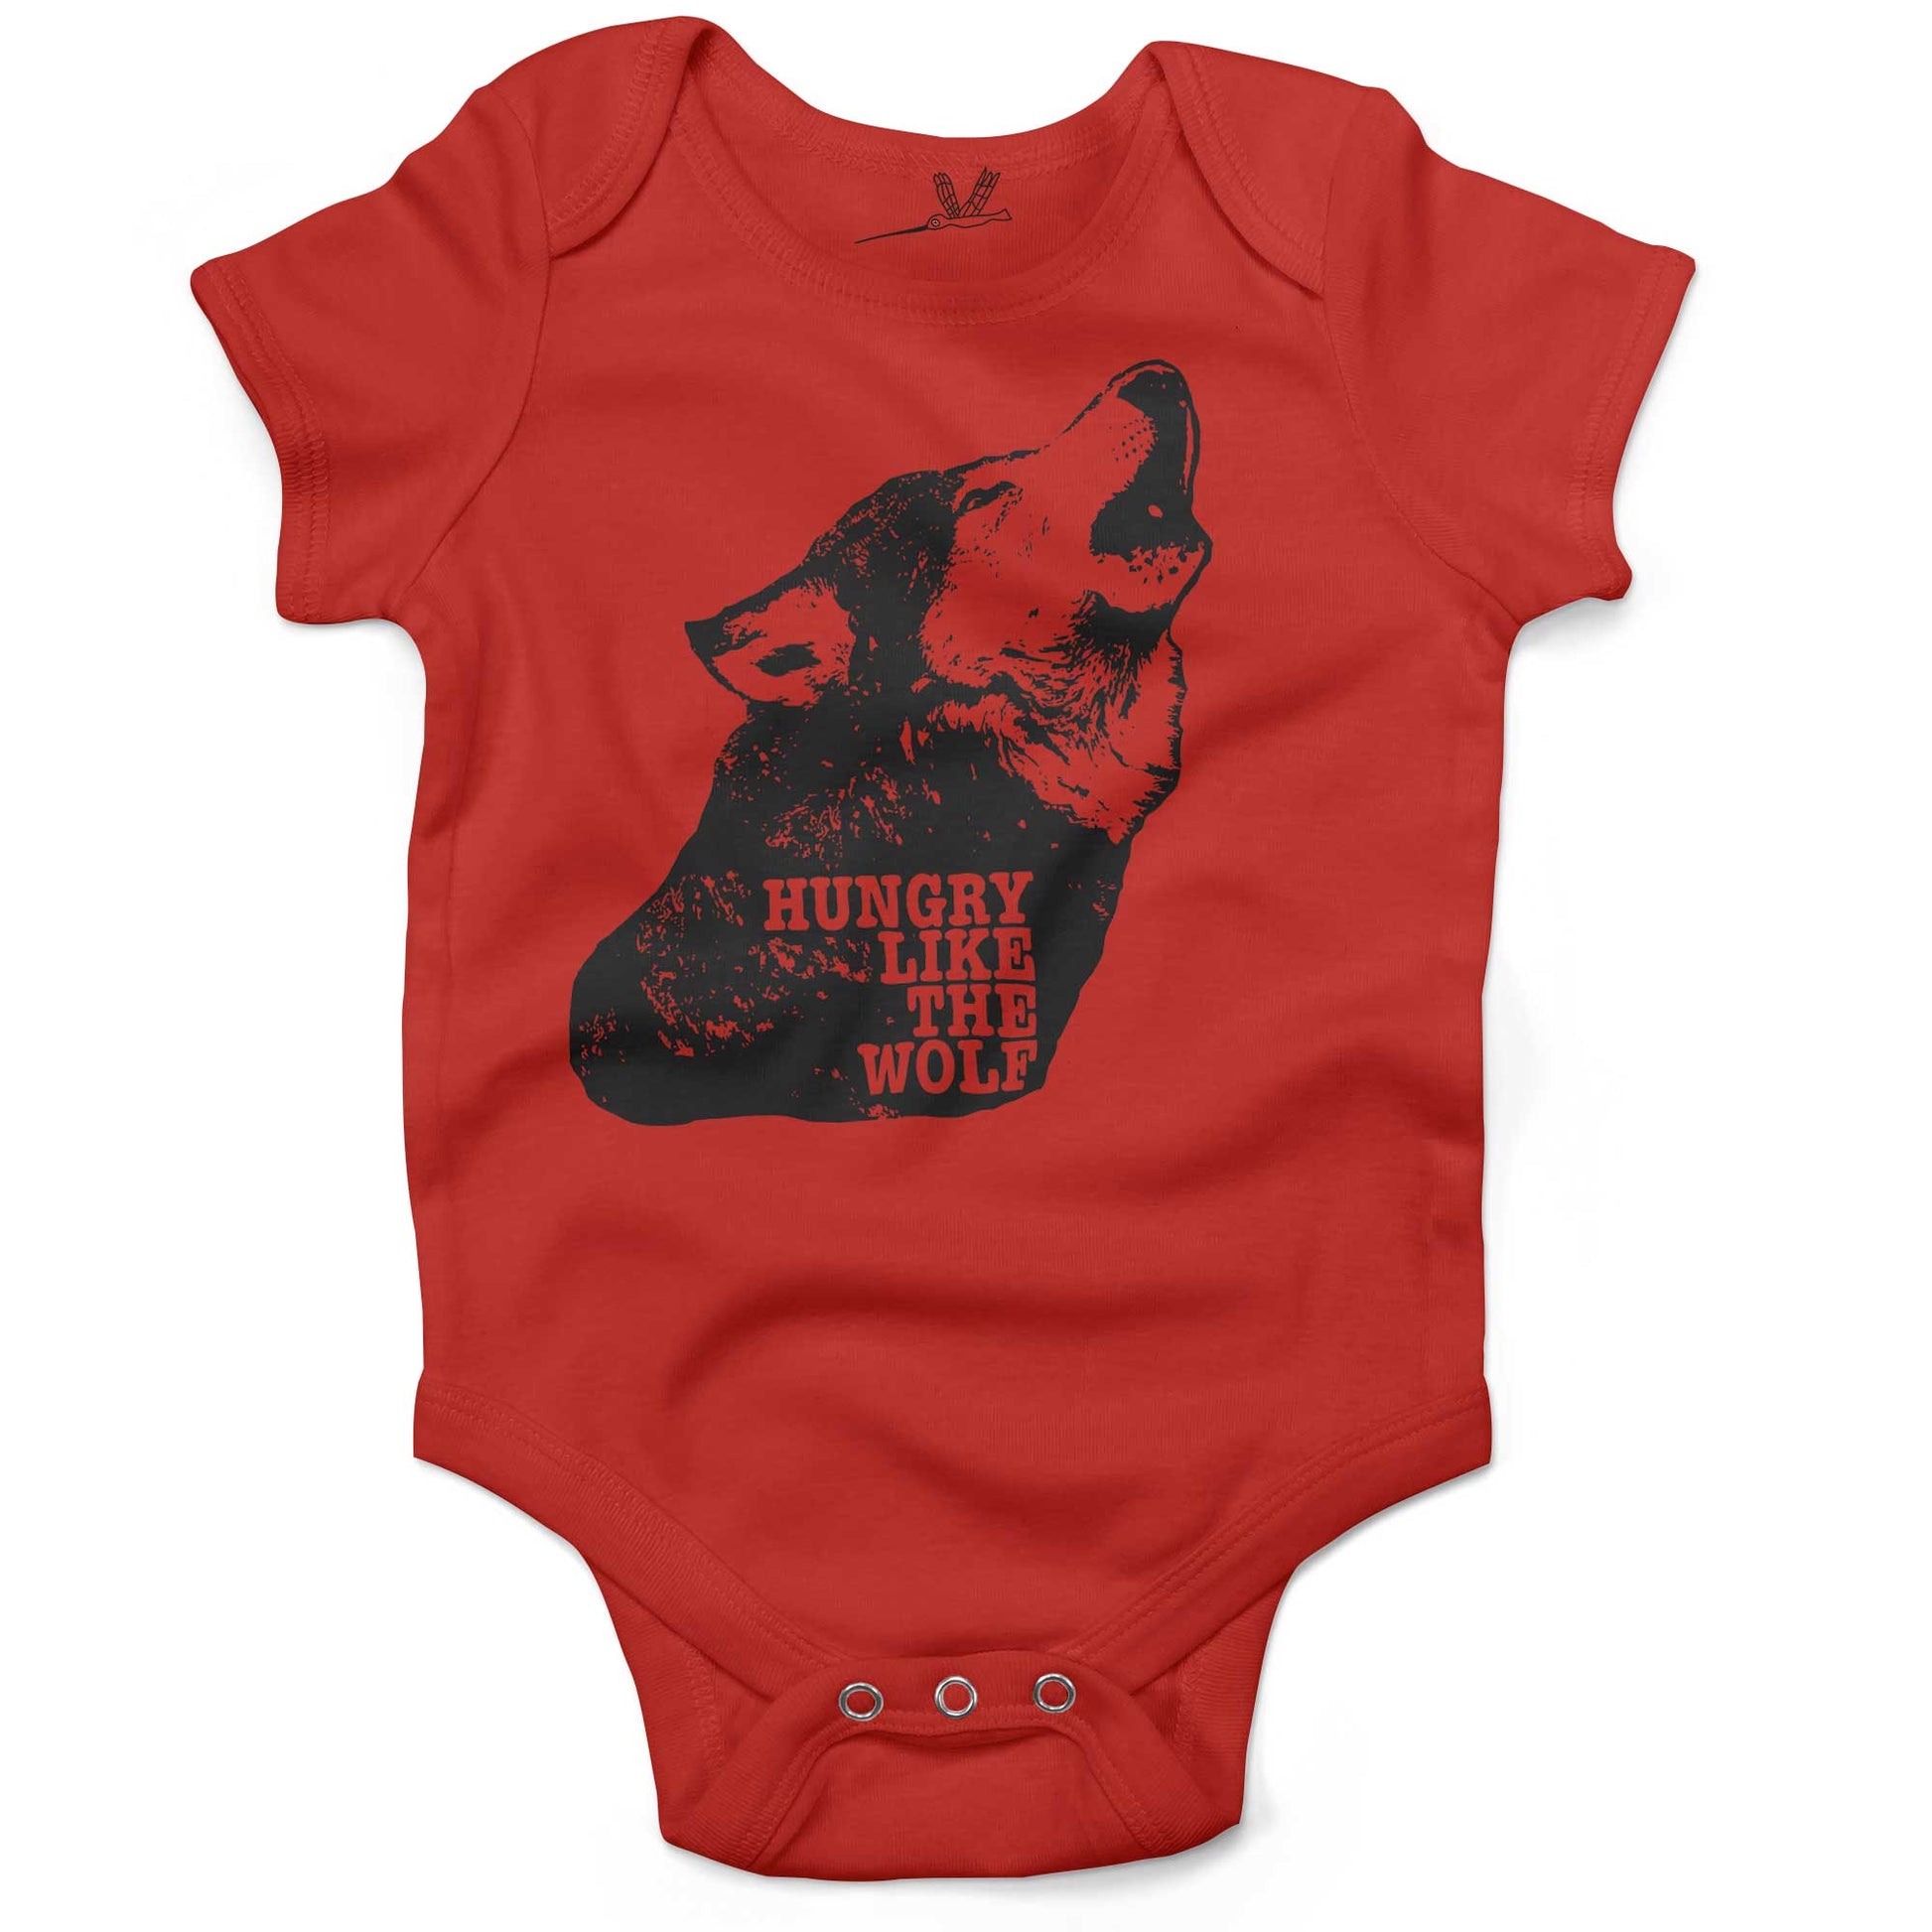 Hungry Like The Wolf Infant Bodysuit or Raglan Baby Tee-Organic Red-3-6 months